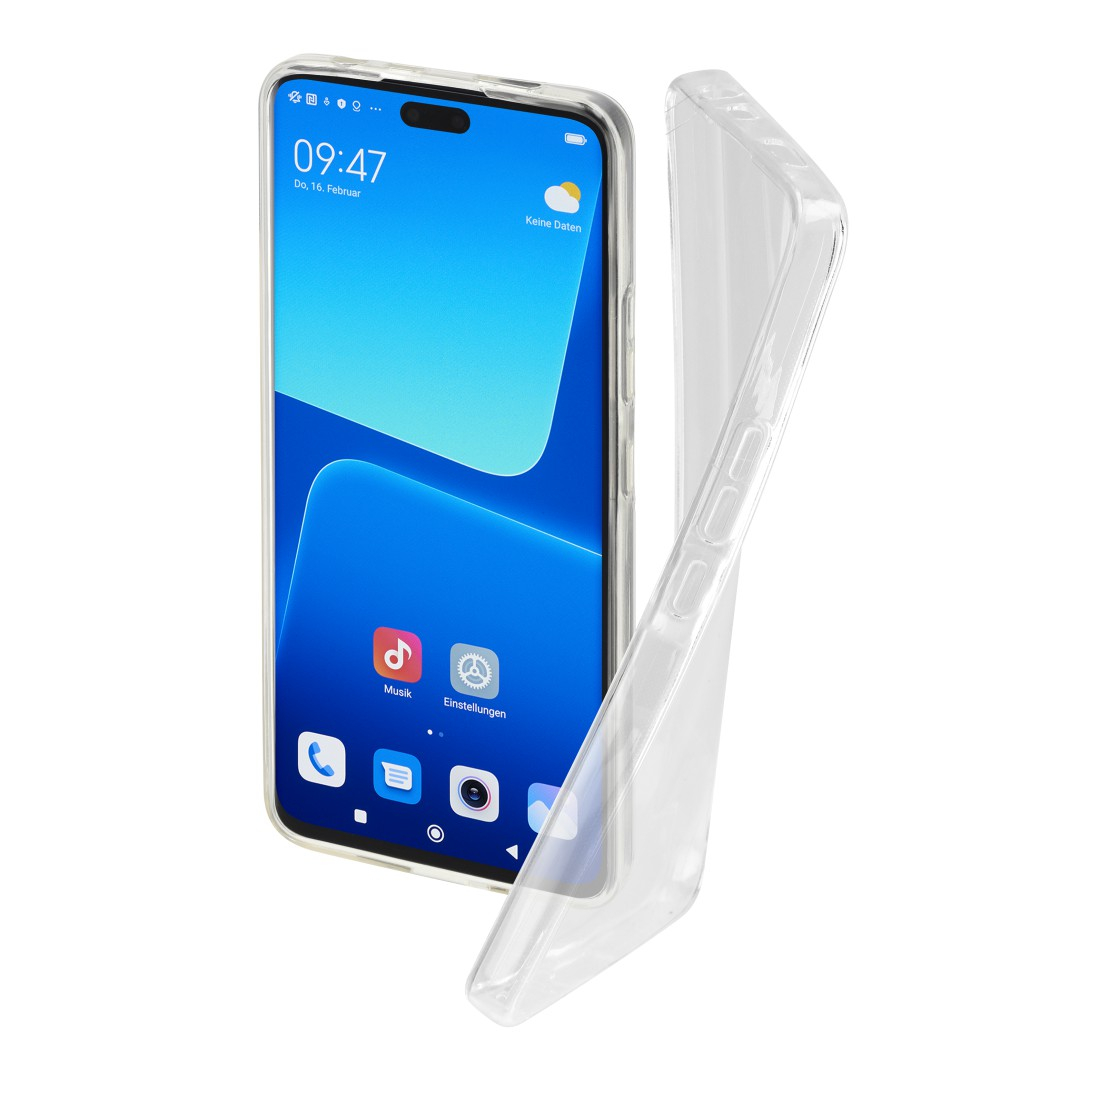 Backcover, 13 Xiaomi, Transparent Crystal 5G, Lite Clear, HAMA